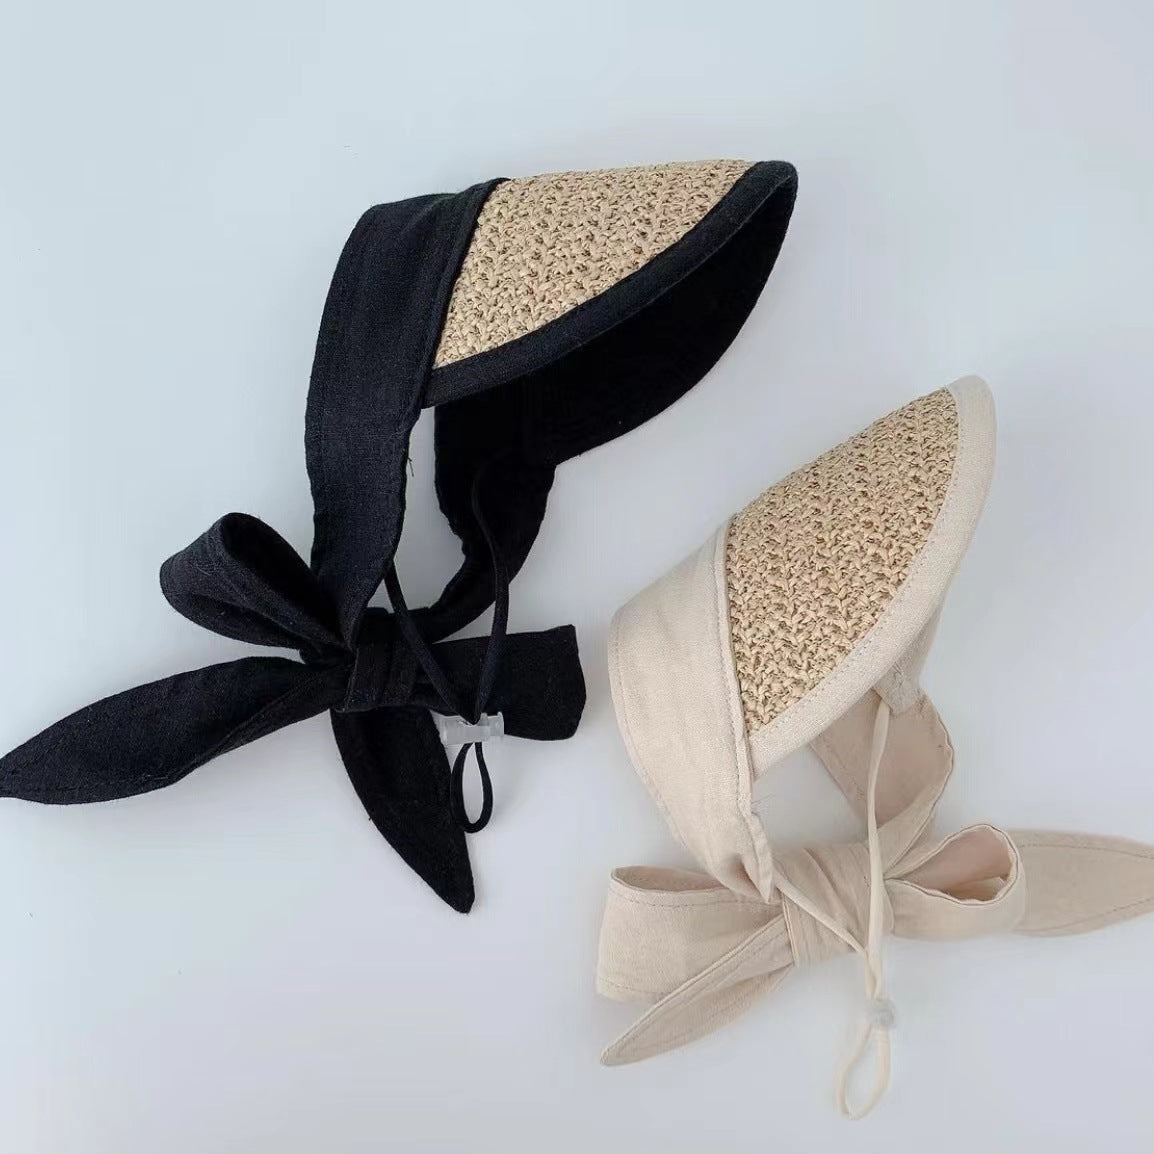 Straw Sun Hat | Two Colour-ways